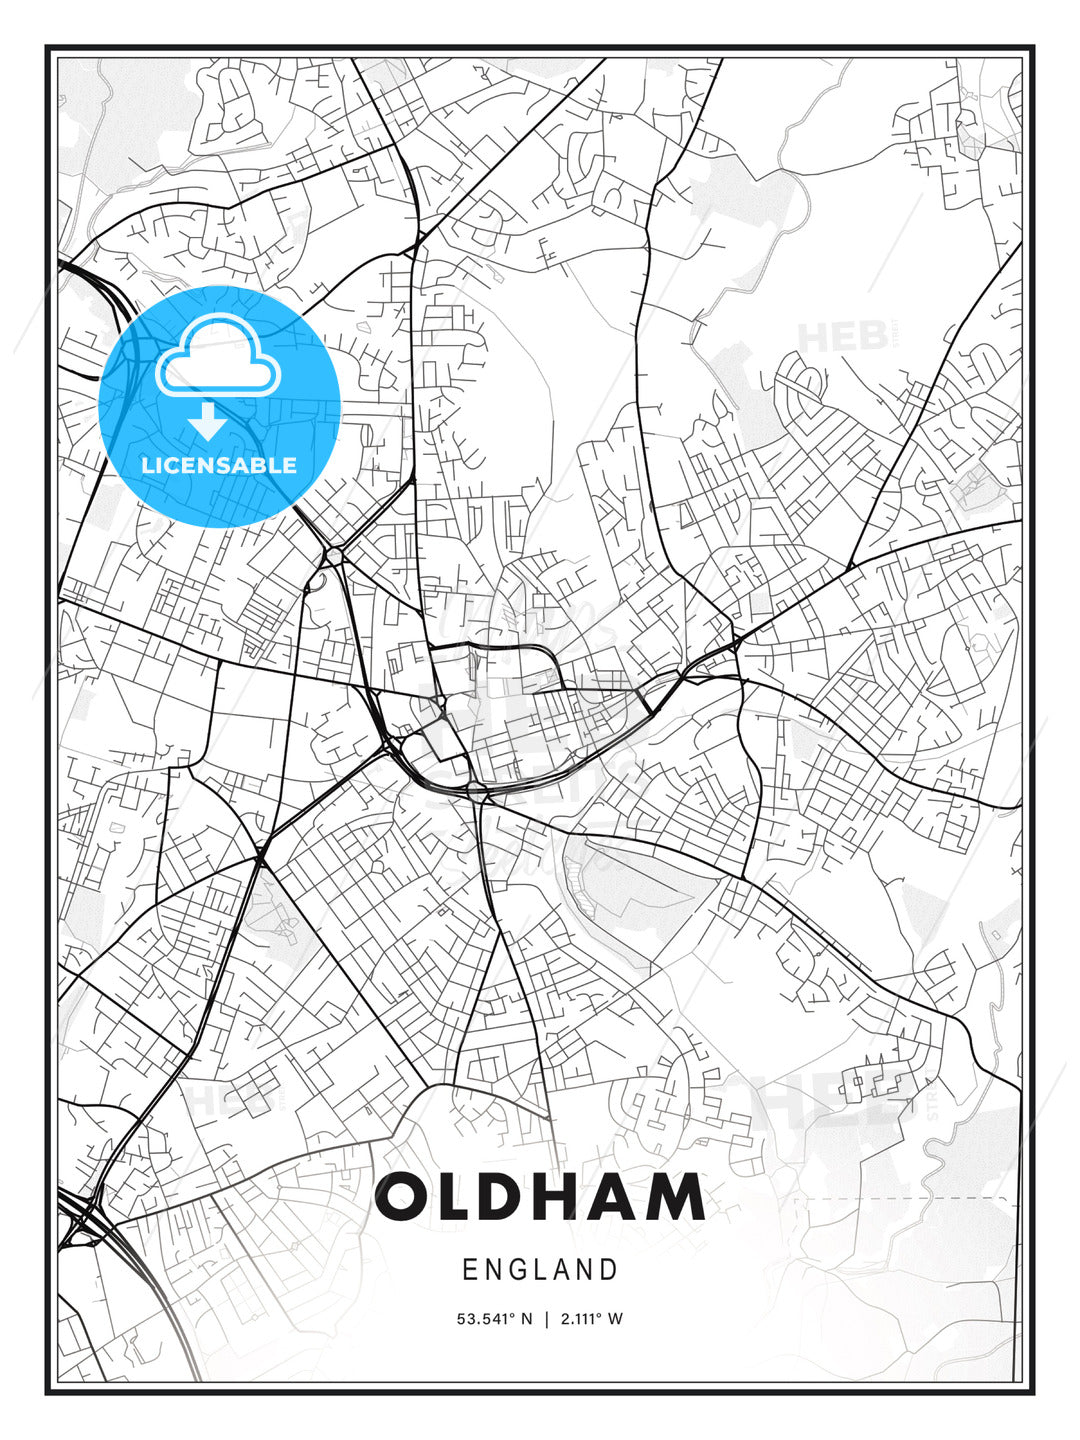 Oldham, England, Modern Print Template in Various Formats - HEBSTREITS Sketches